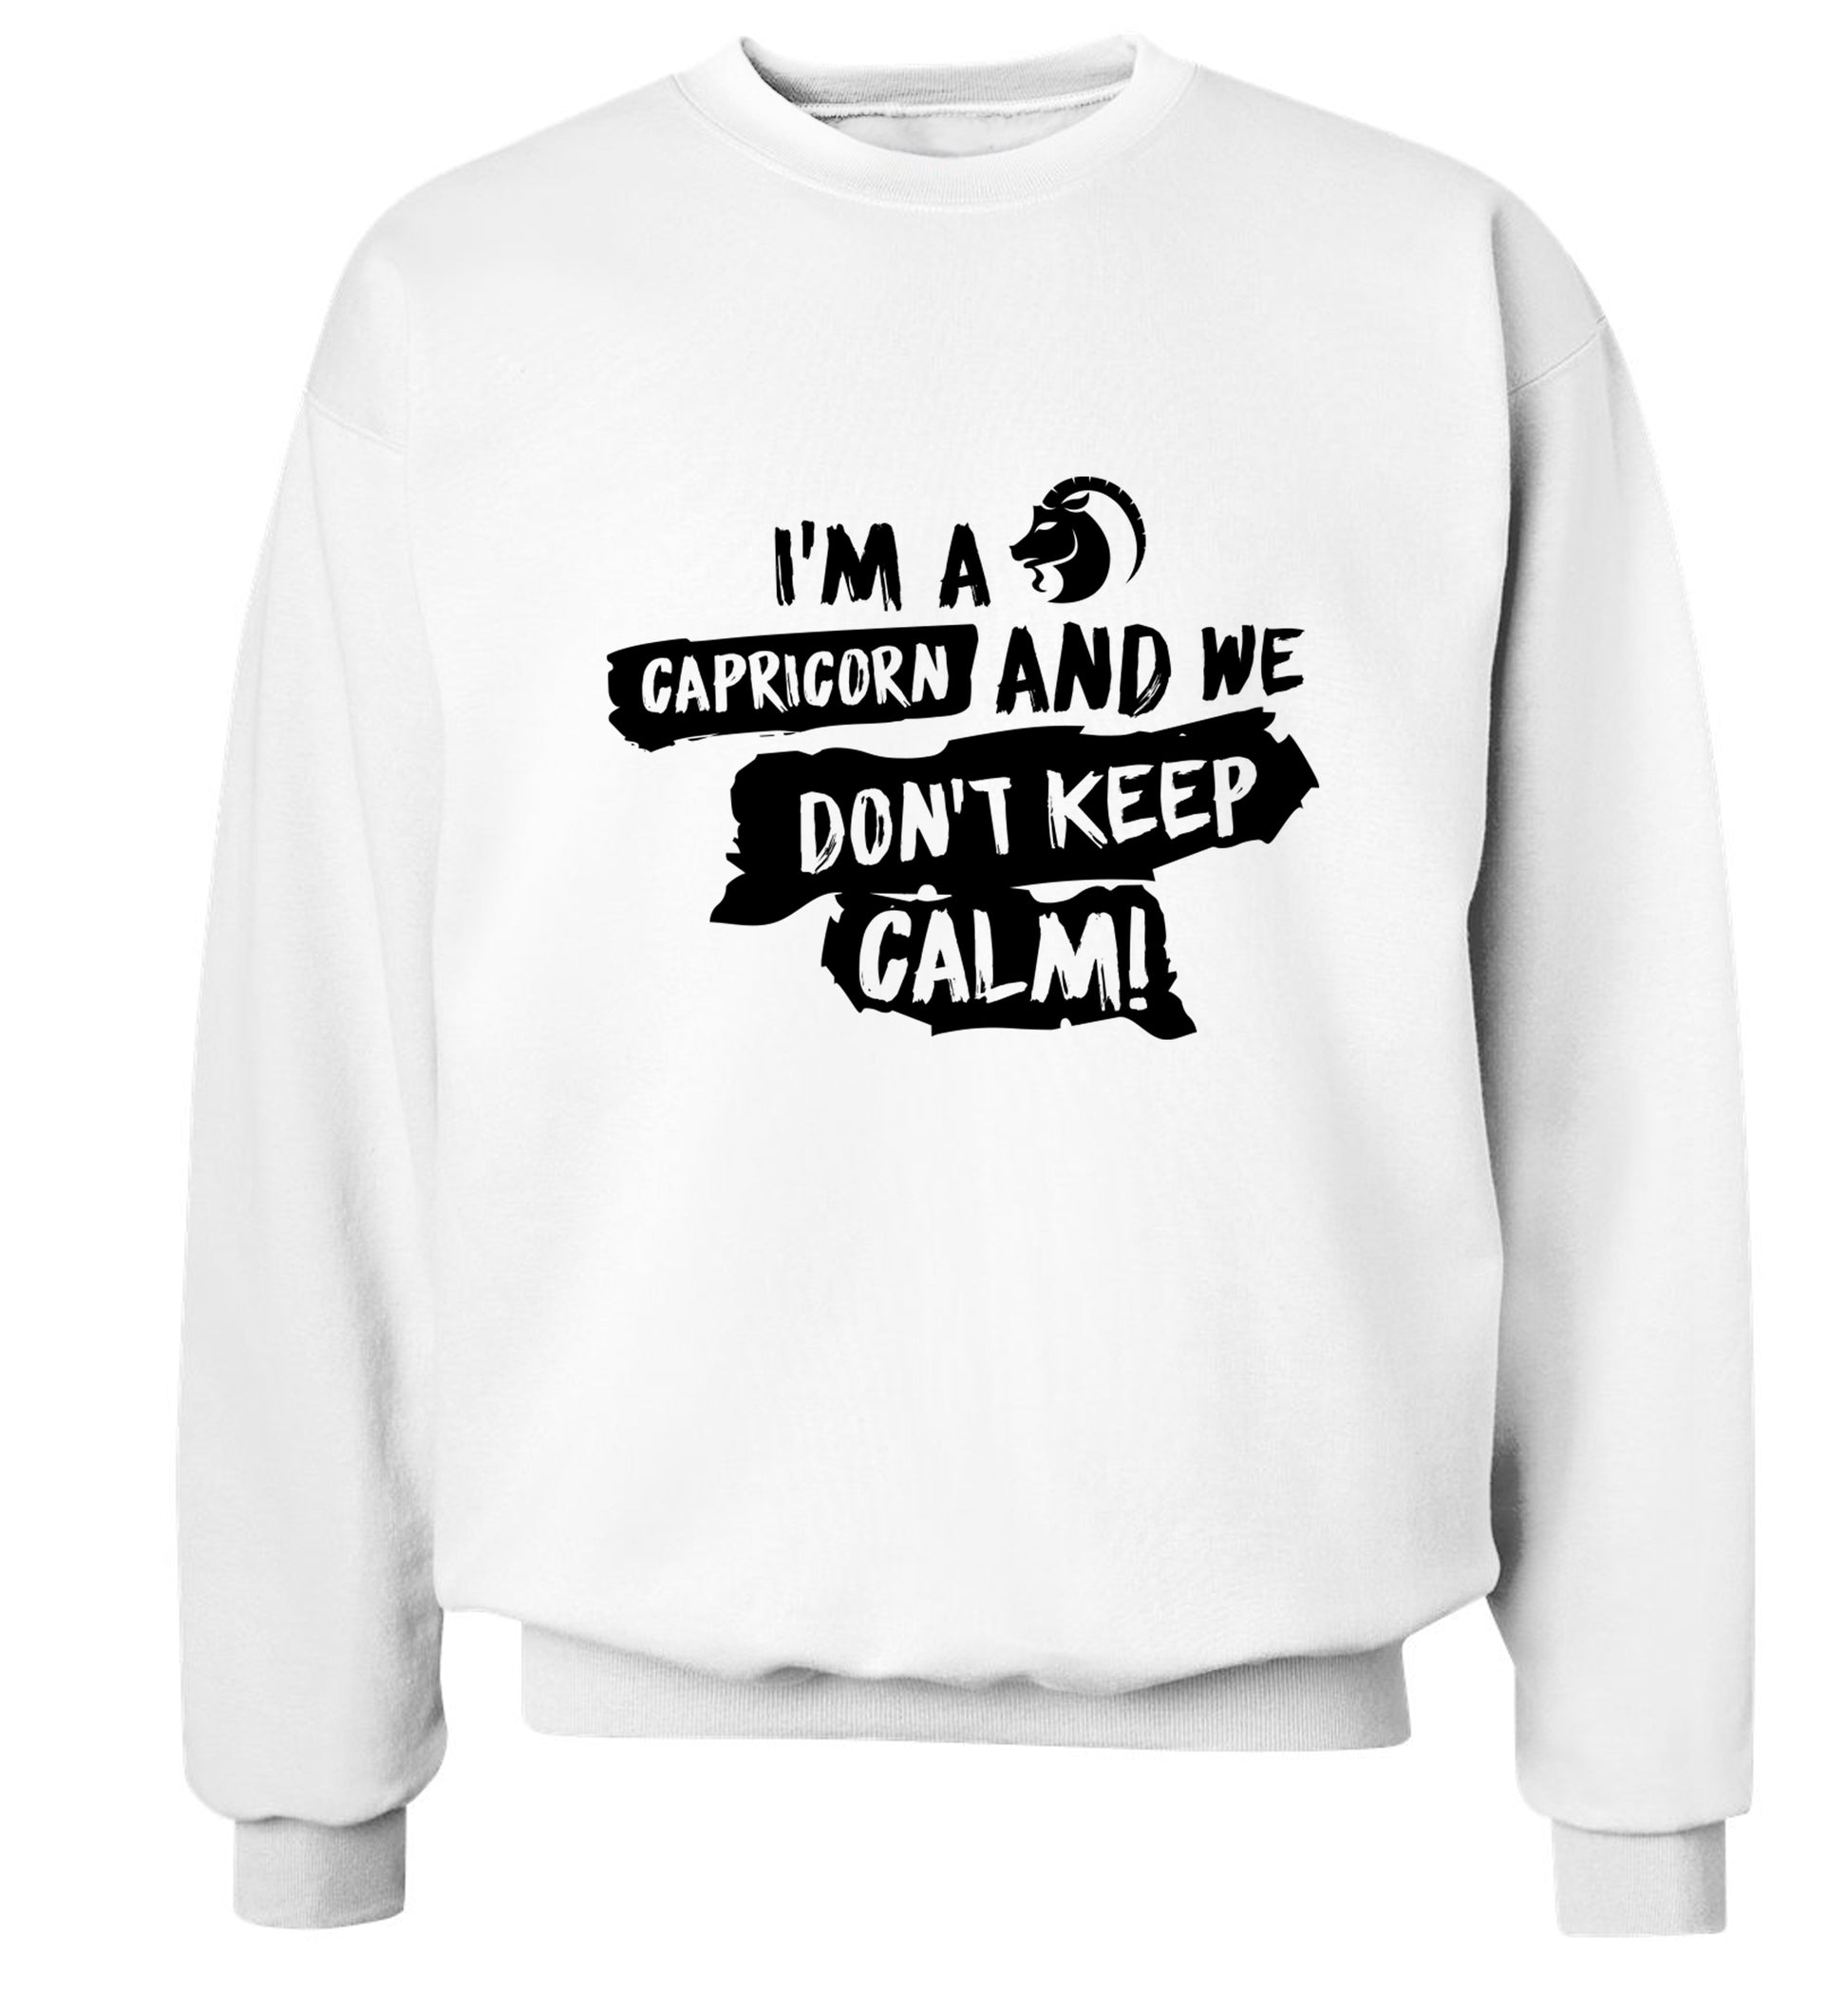 I'm a capricorn and we don't keep calm Adult's unisex white Sweater 2XL